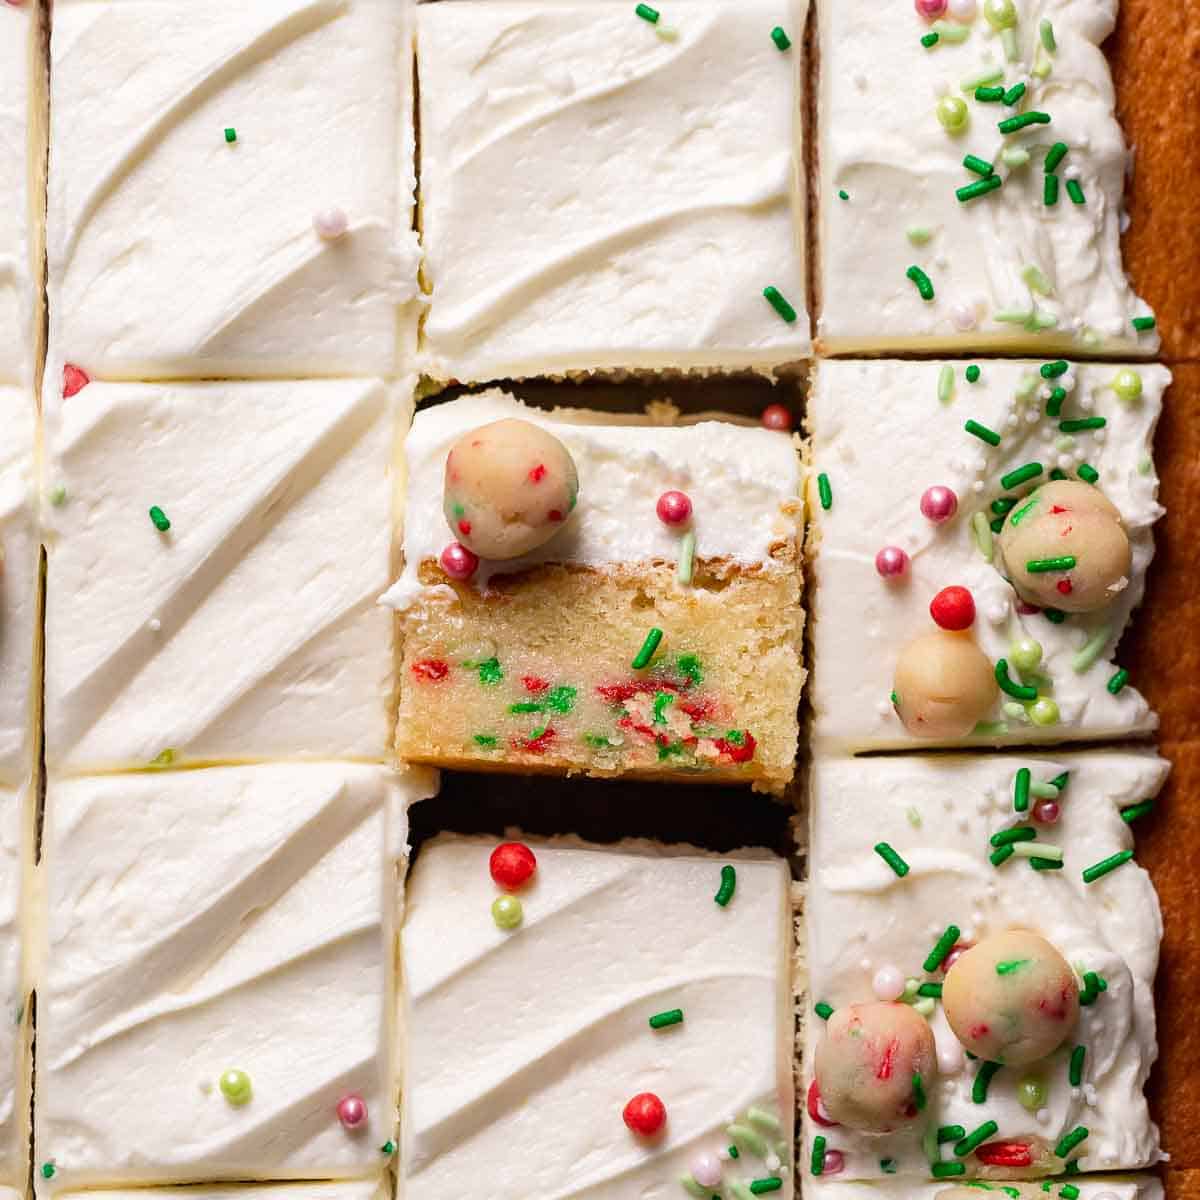 A slice of sugar cookie cake on its side to show the sugar cookie dough layer.